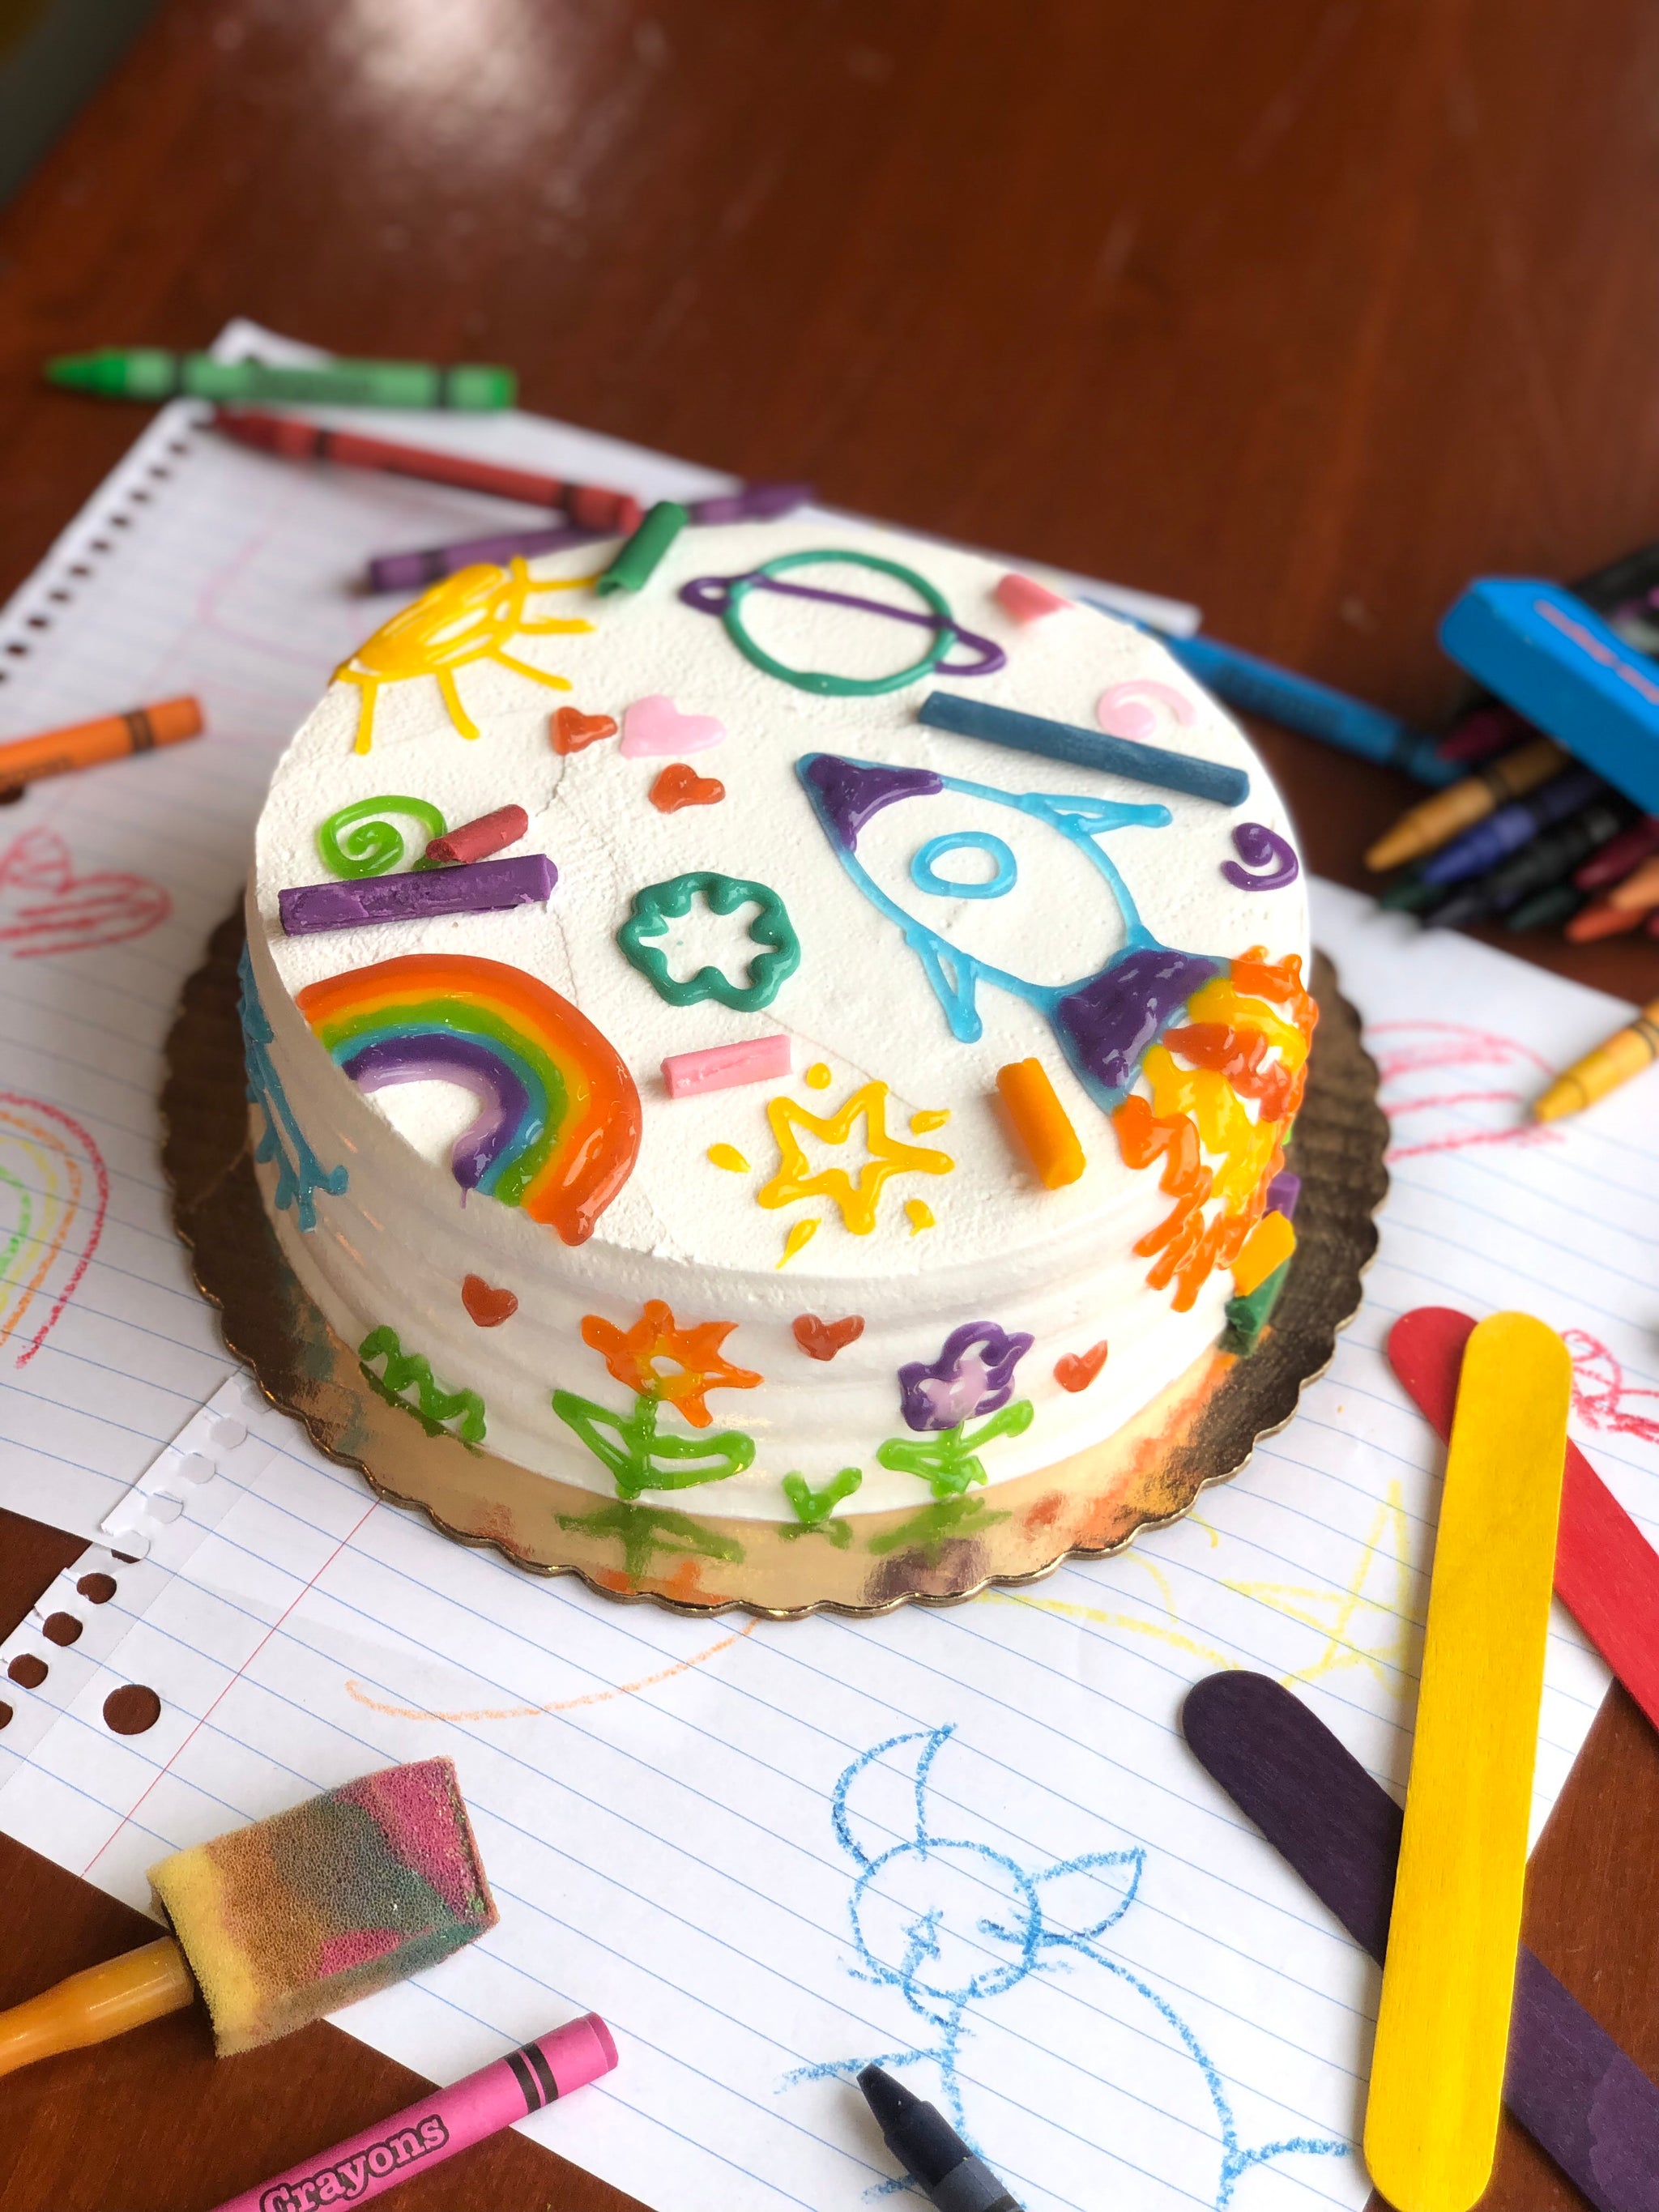 5 Simple Cake Decorating Ideas For Birthdays - The Cake Decorating Co. |  BlogThe Cake Decorating Co. | Blog